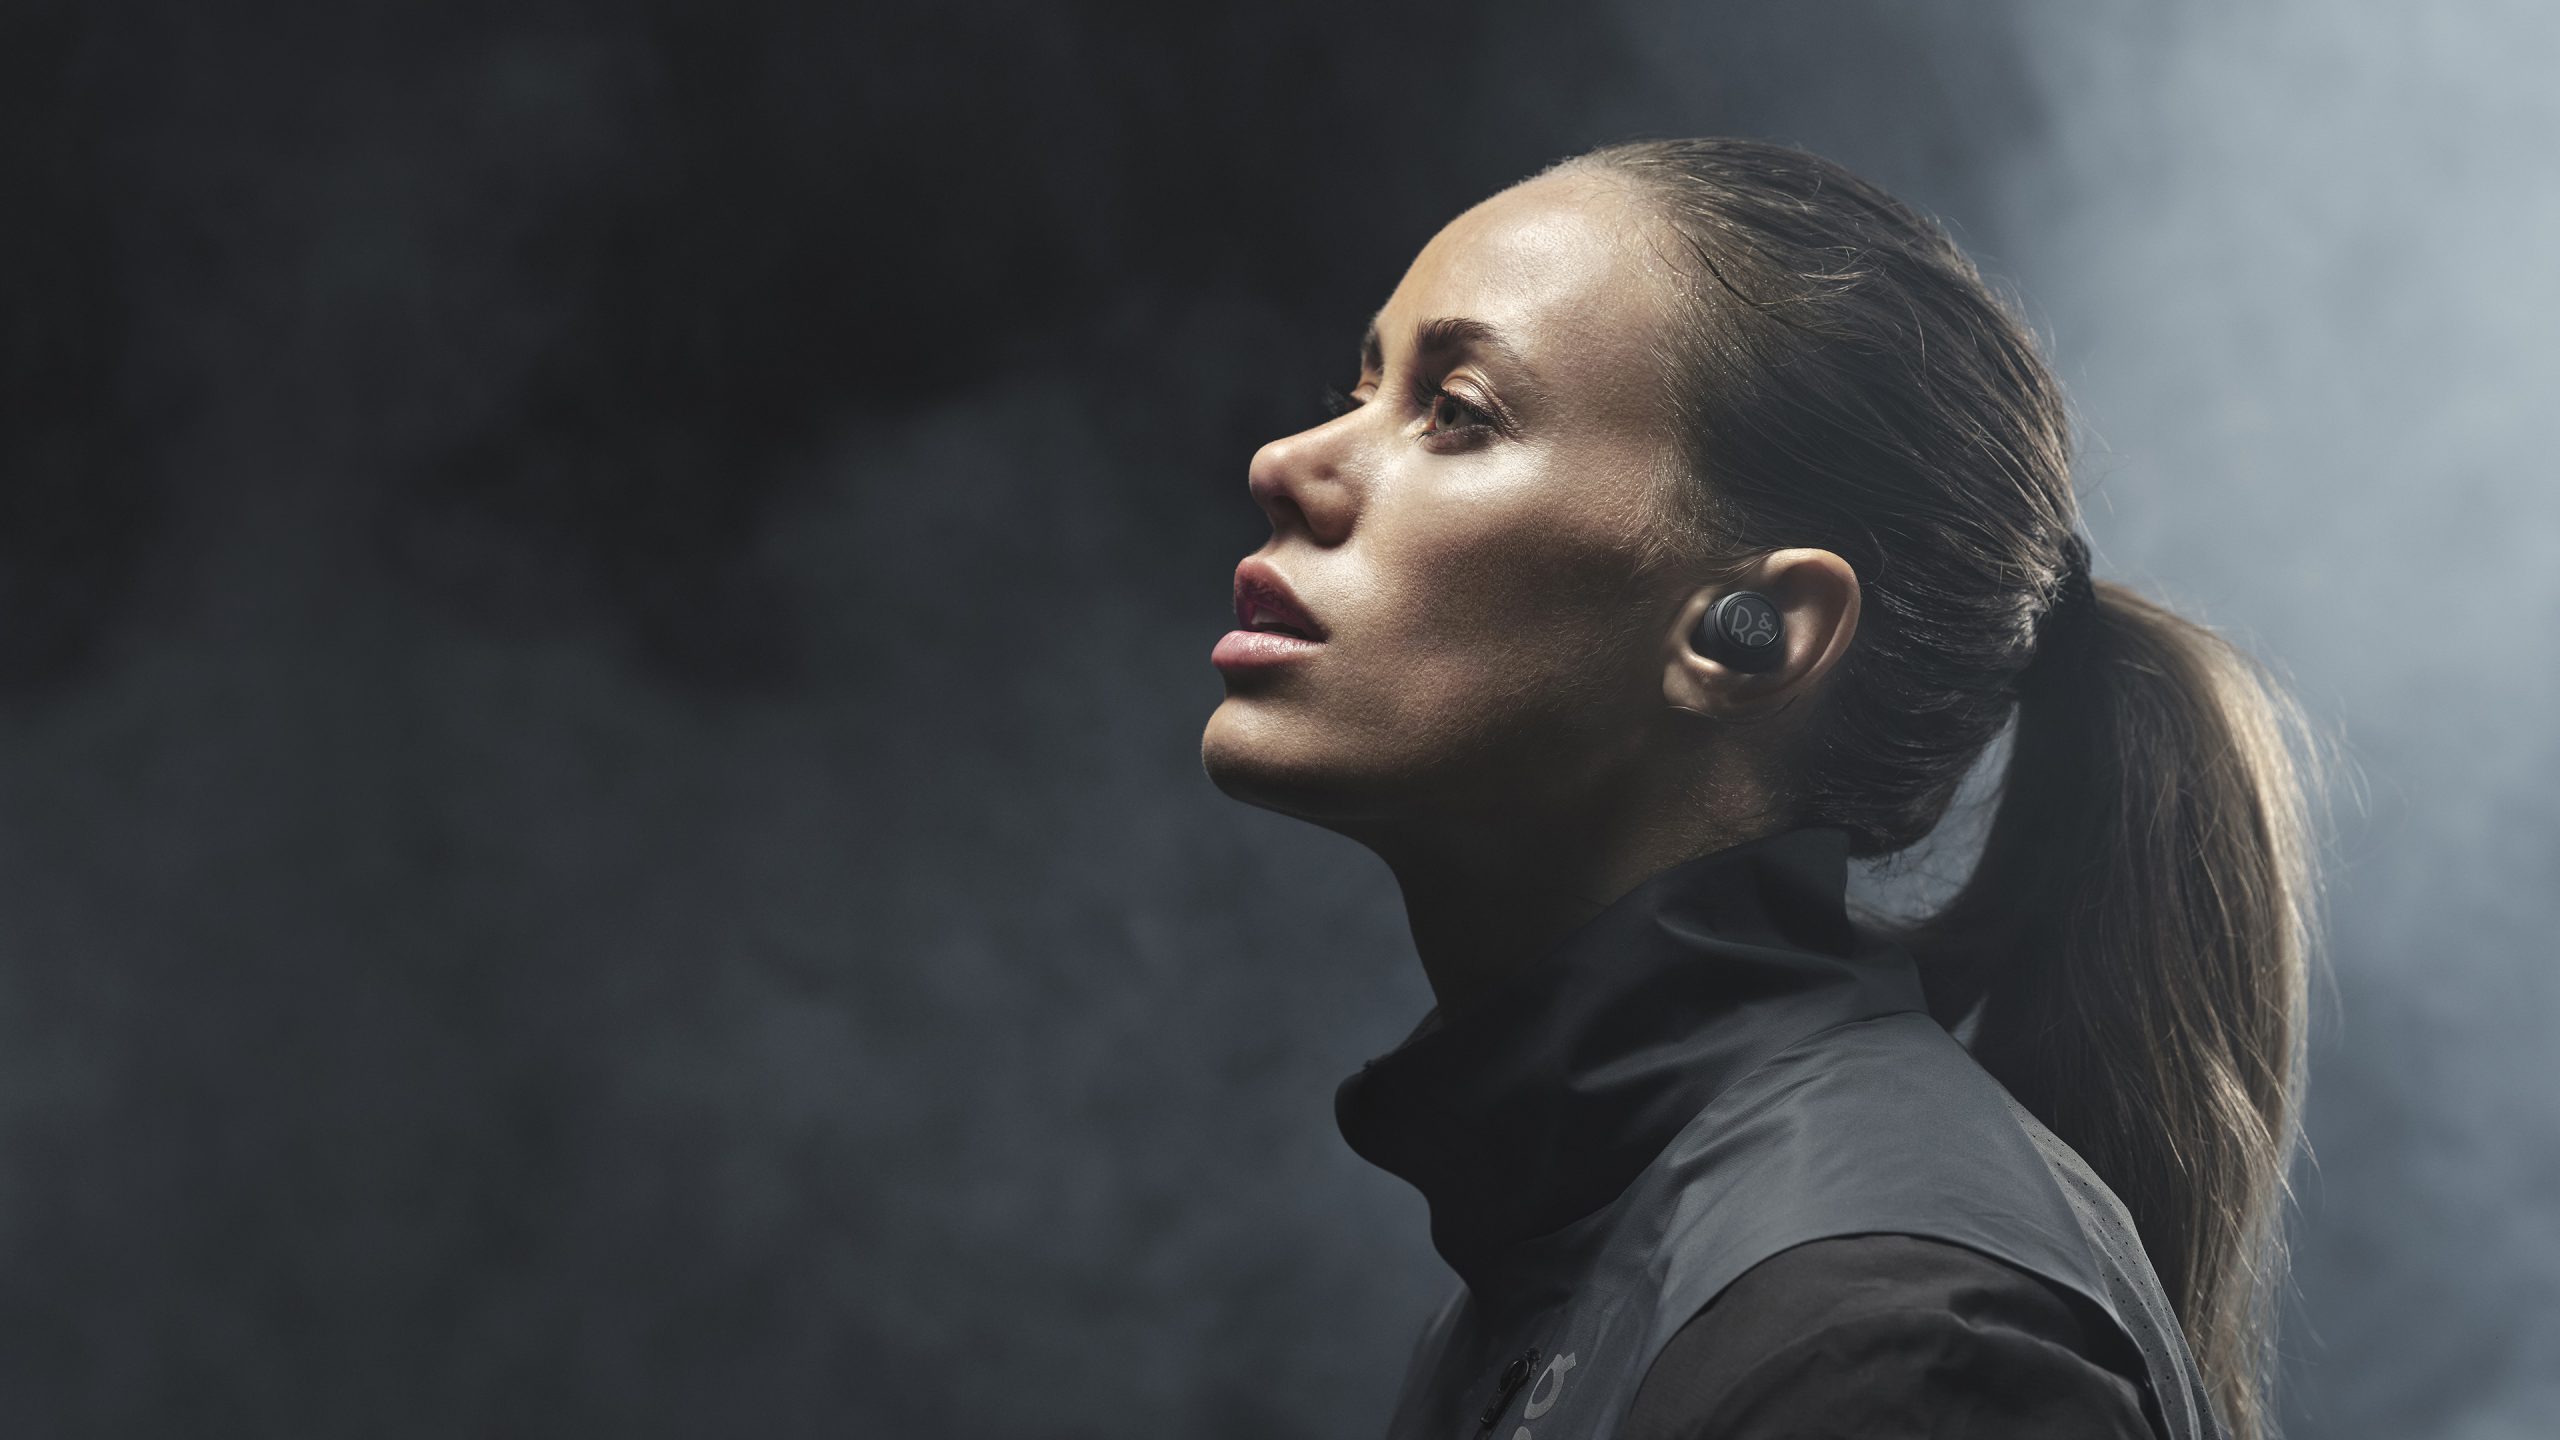 Beoplay E8 Sport